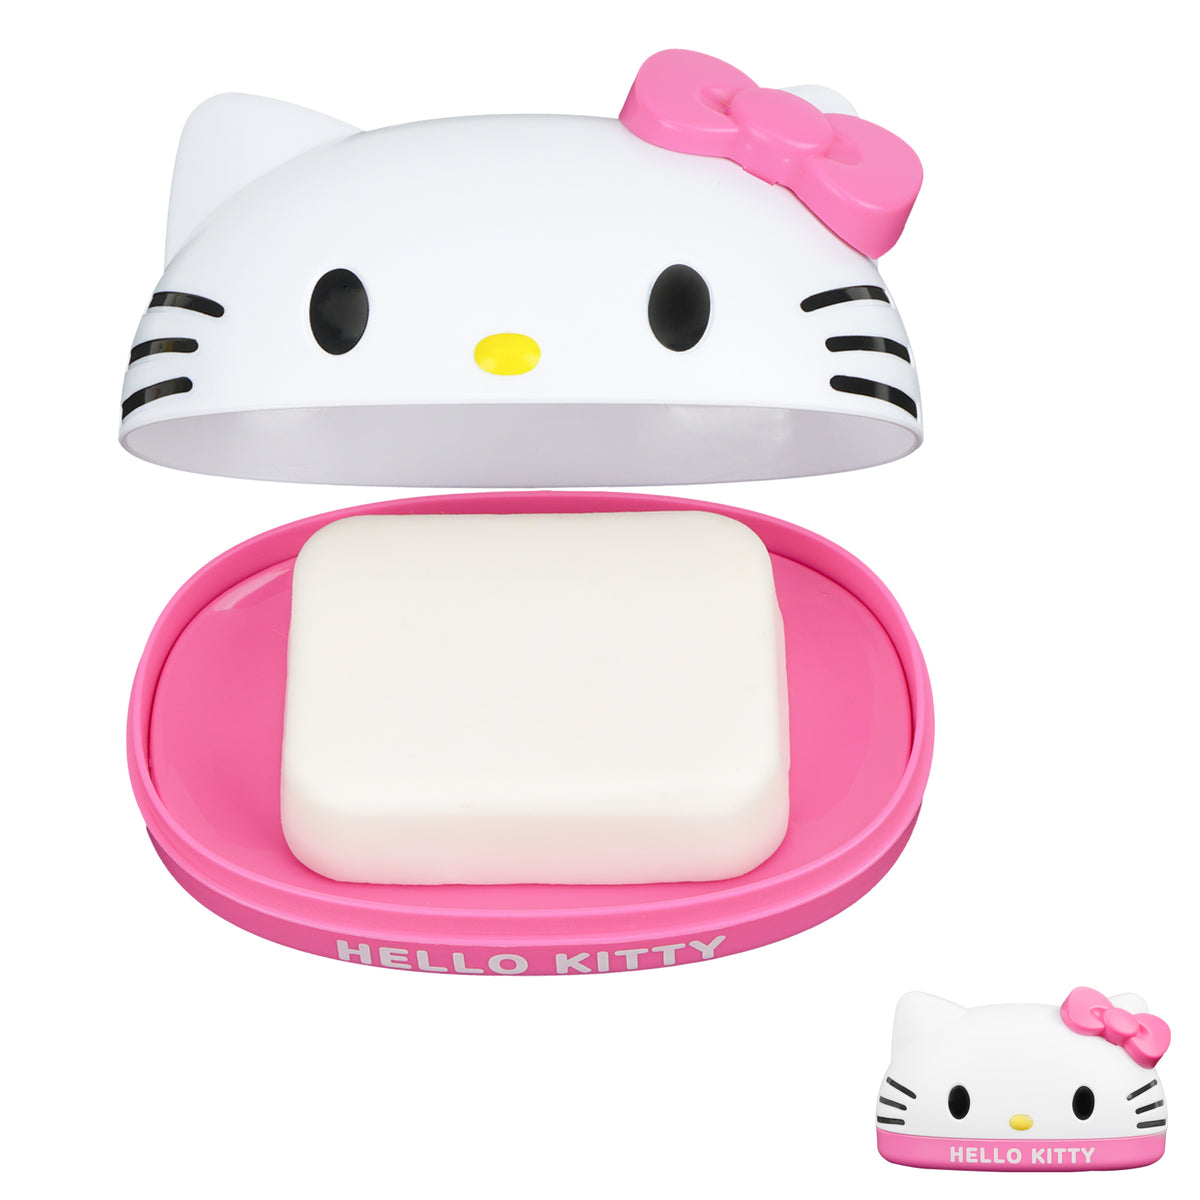 Adorila Hello Kitty Bathroom Soap Dish, Double Layer Draining Soap Holder with Lid, Soap Container Case for Home (Red)